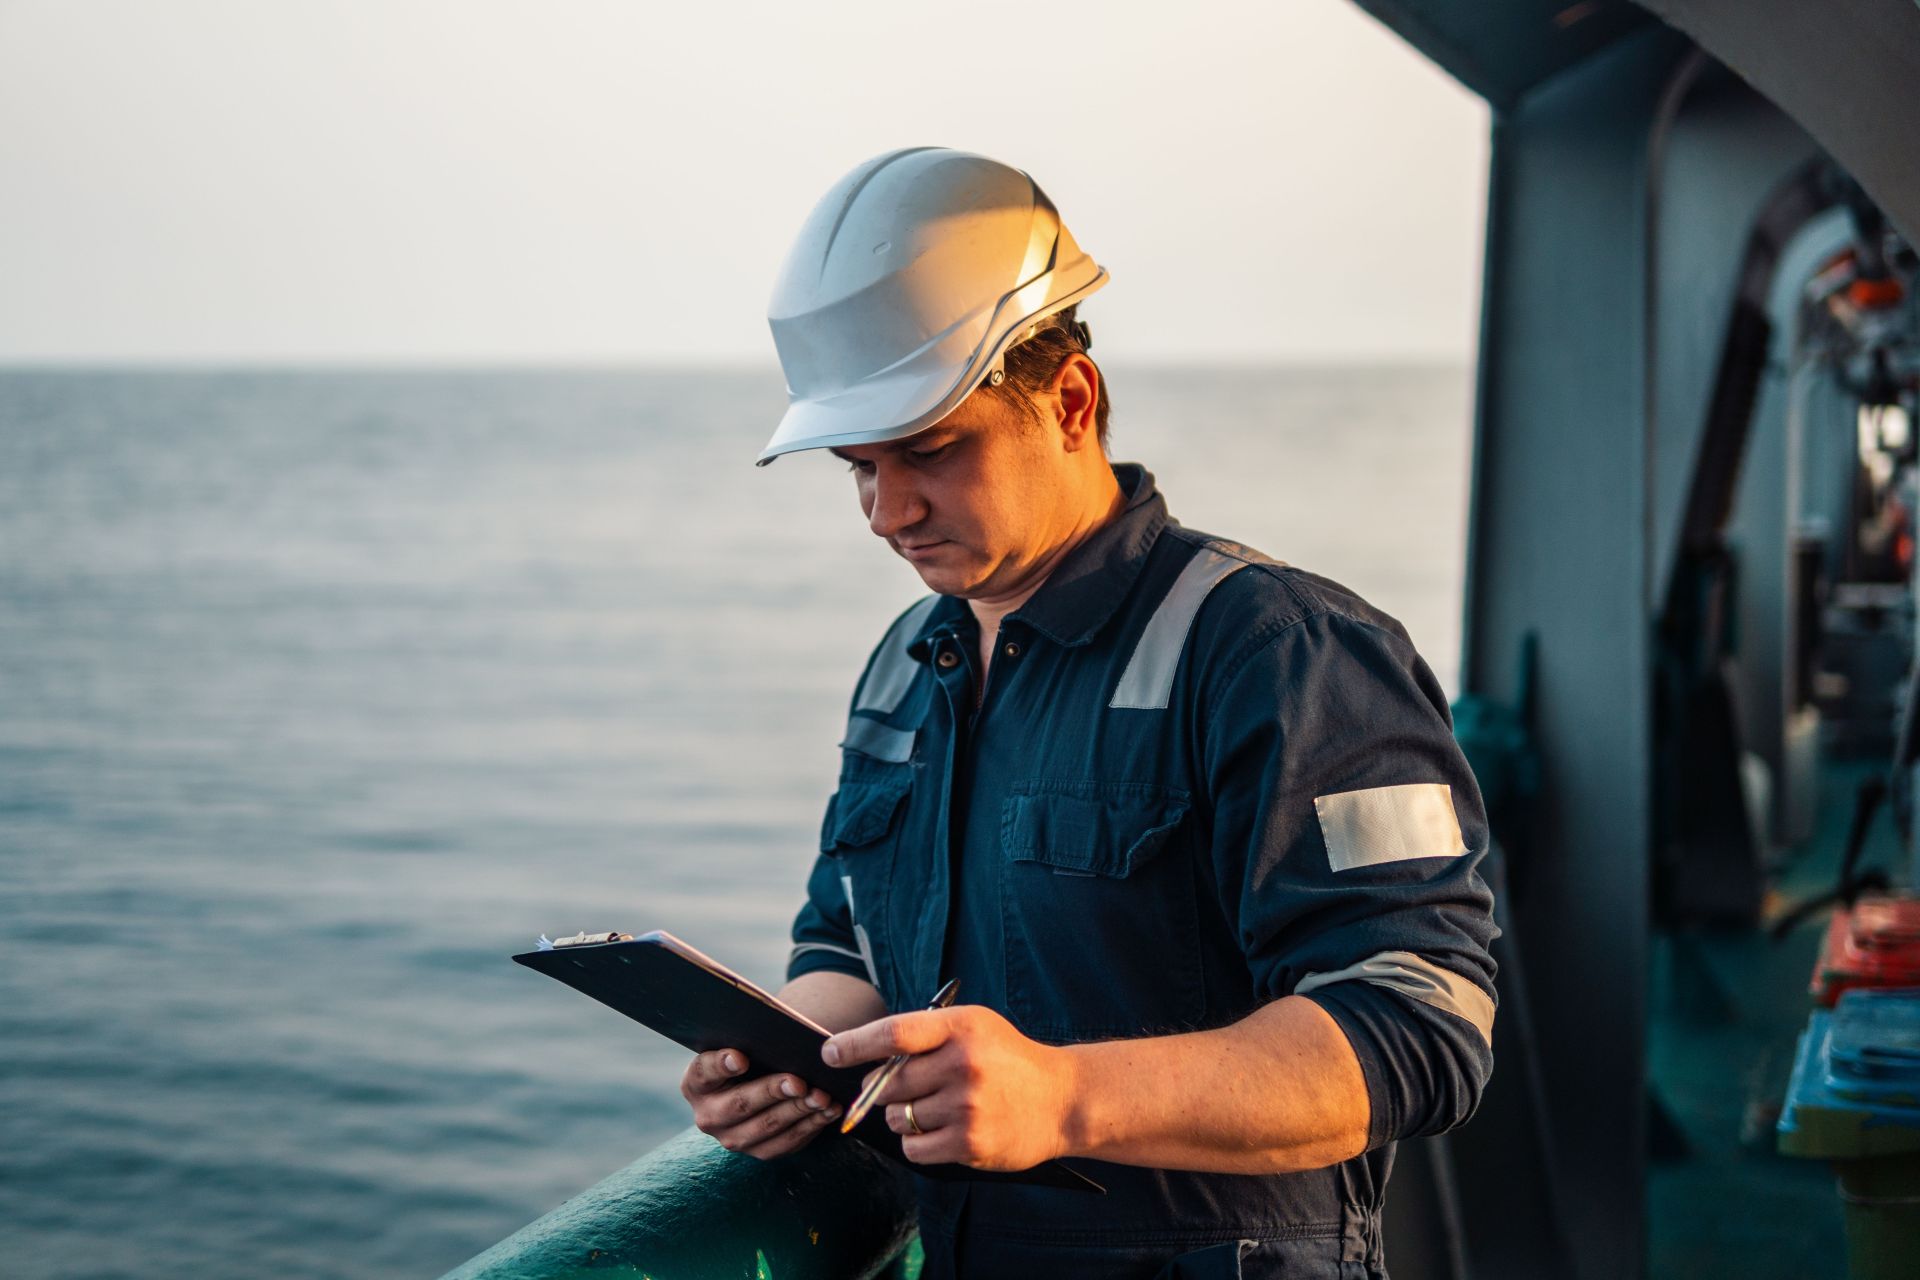 Male marine engineer inspecting with clipboard on ship deck at sunset, wearing safety helmet and coveralls.